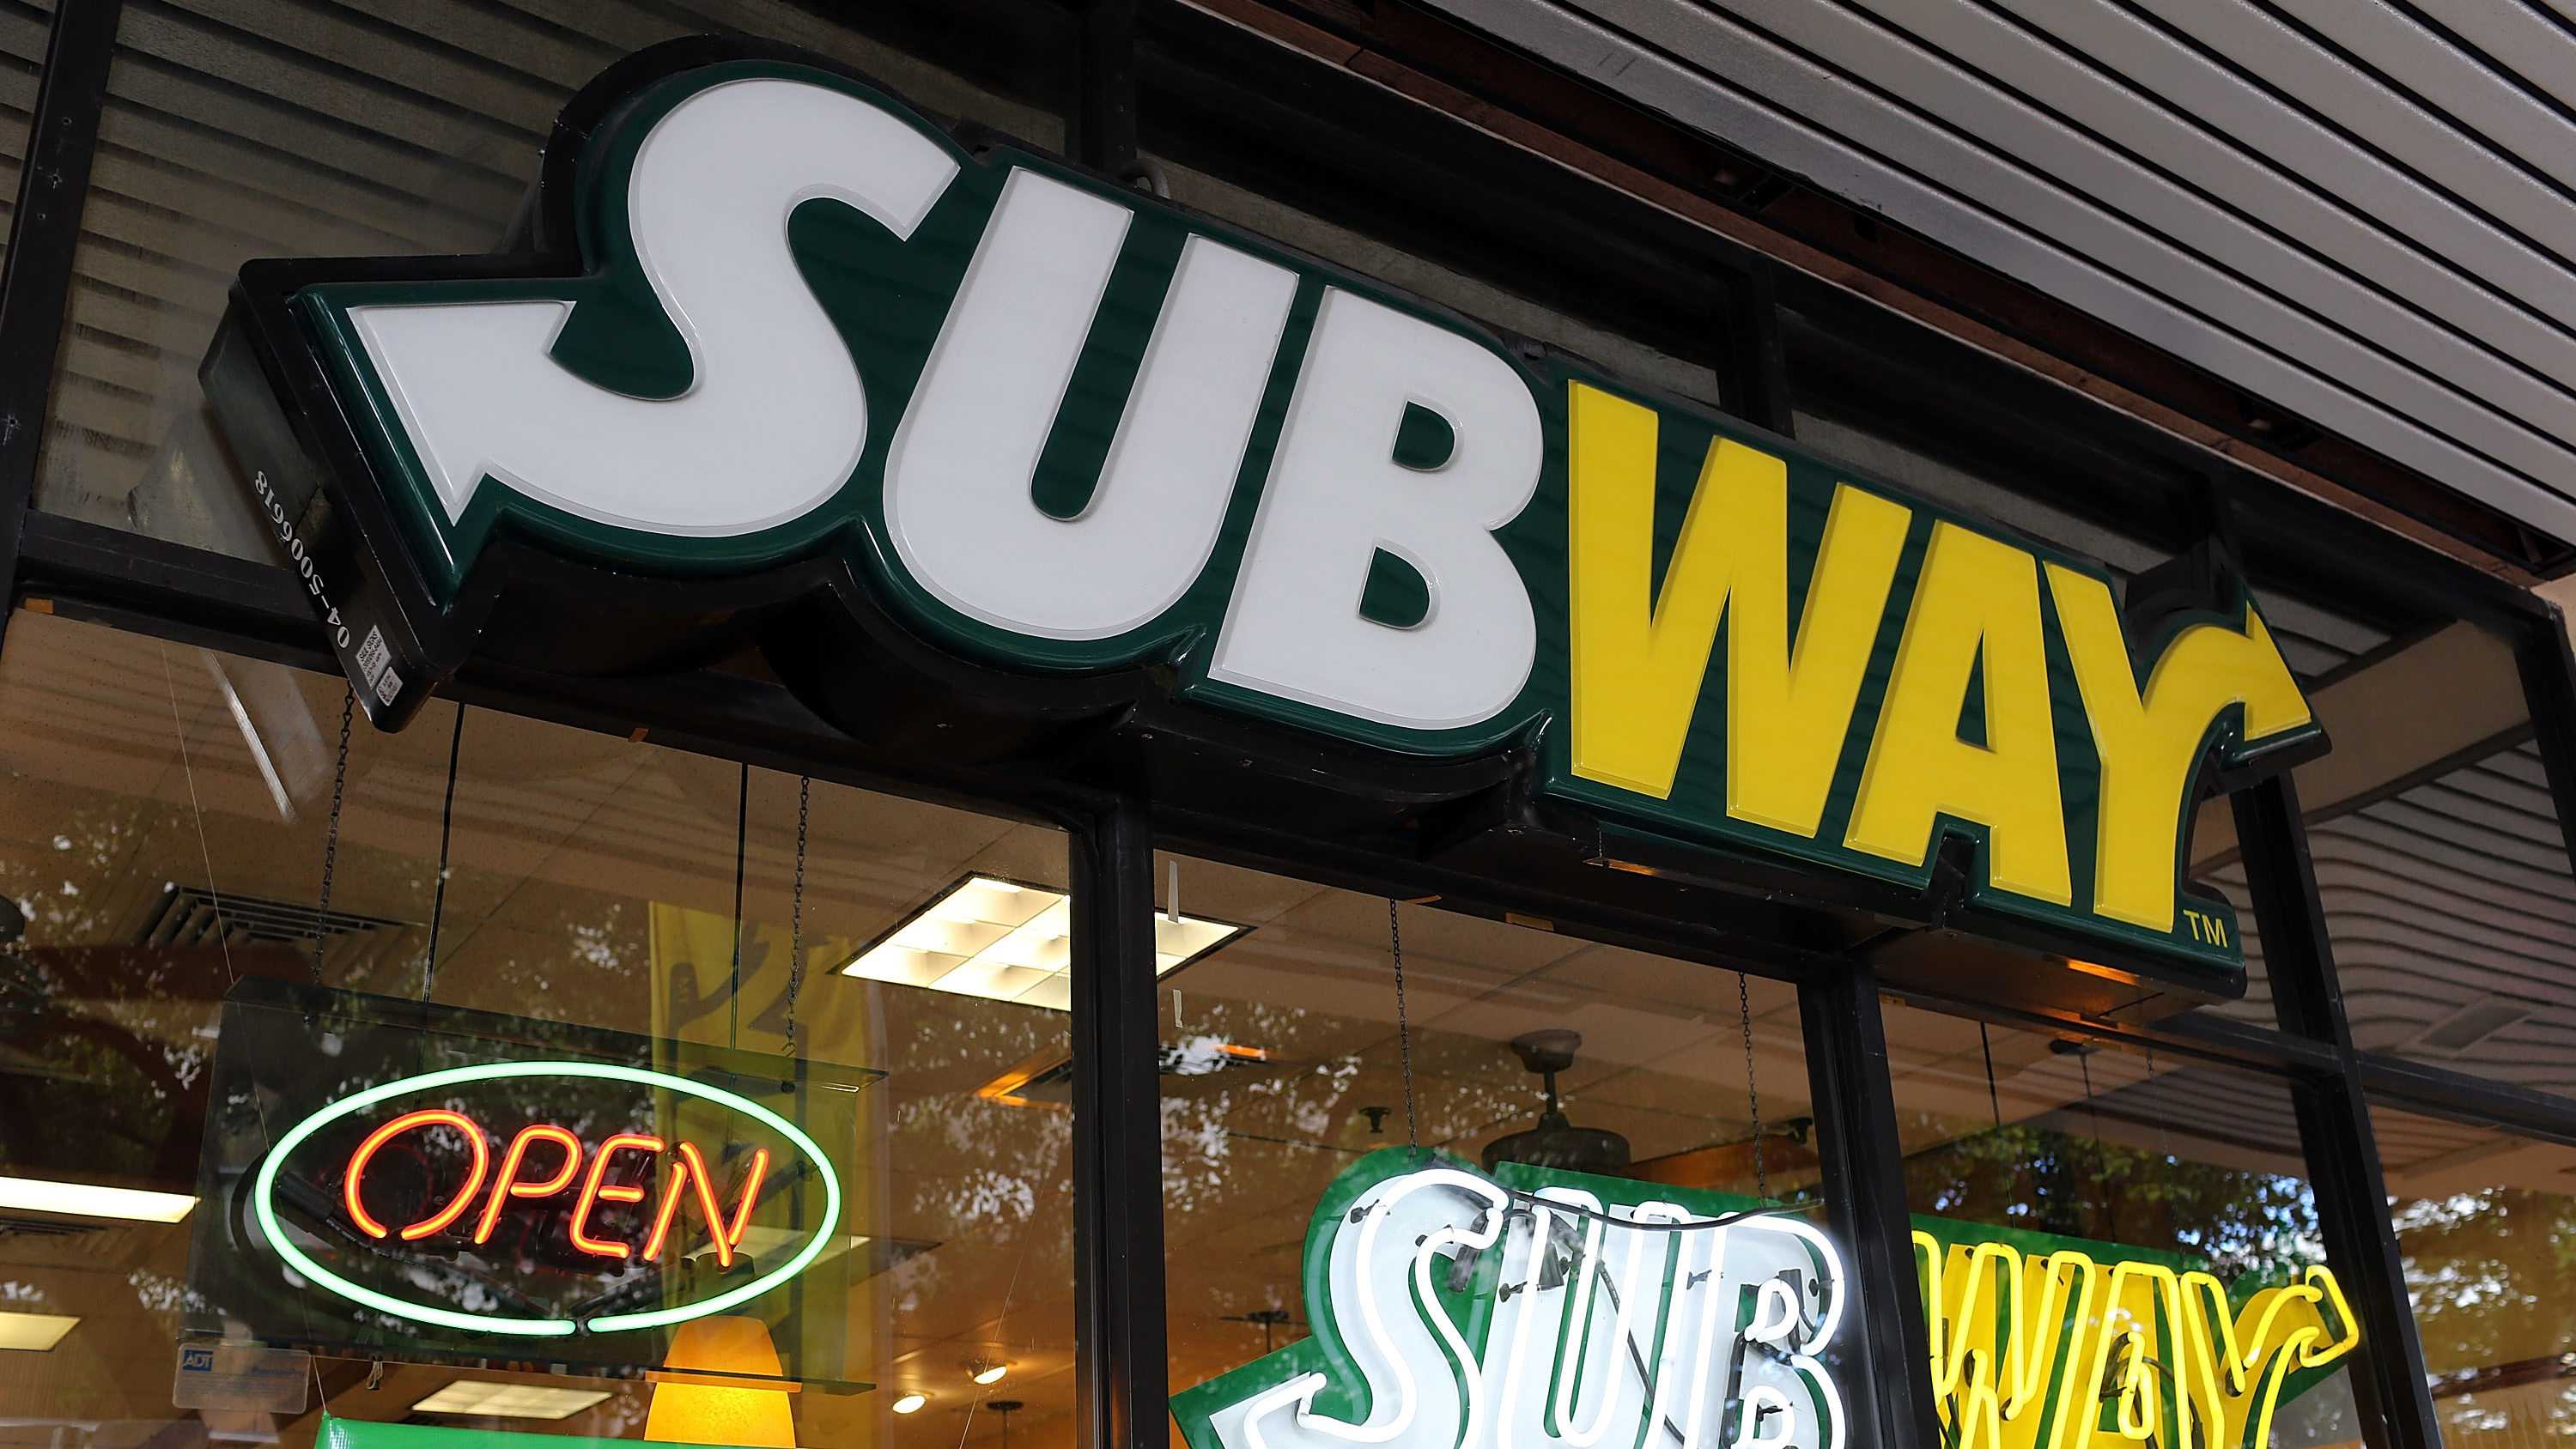 Ex-Subway Manager Offered to Trade Teens Jobs for Sex: Suit